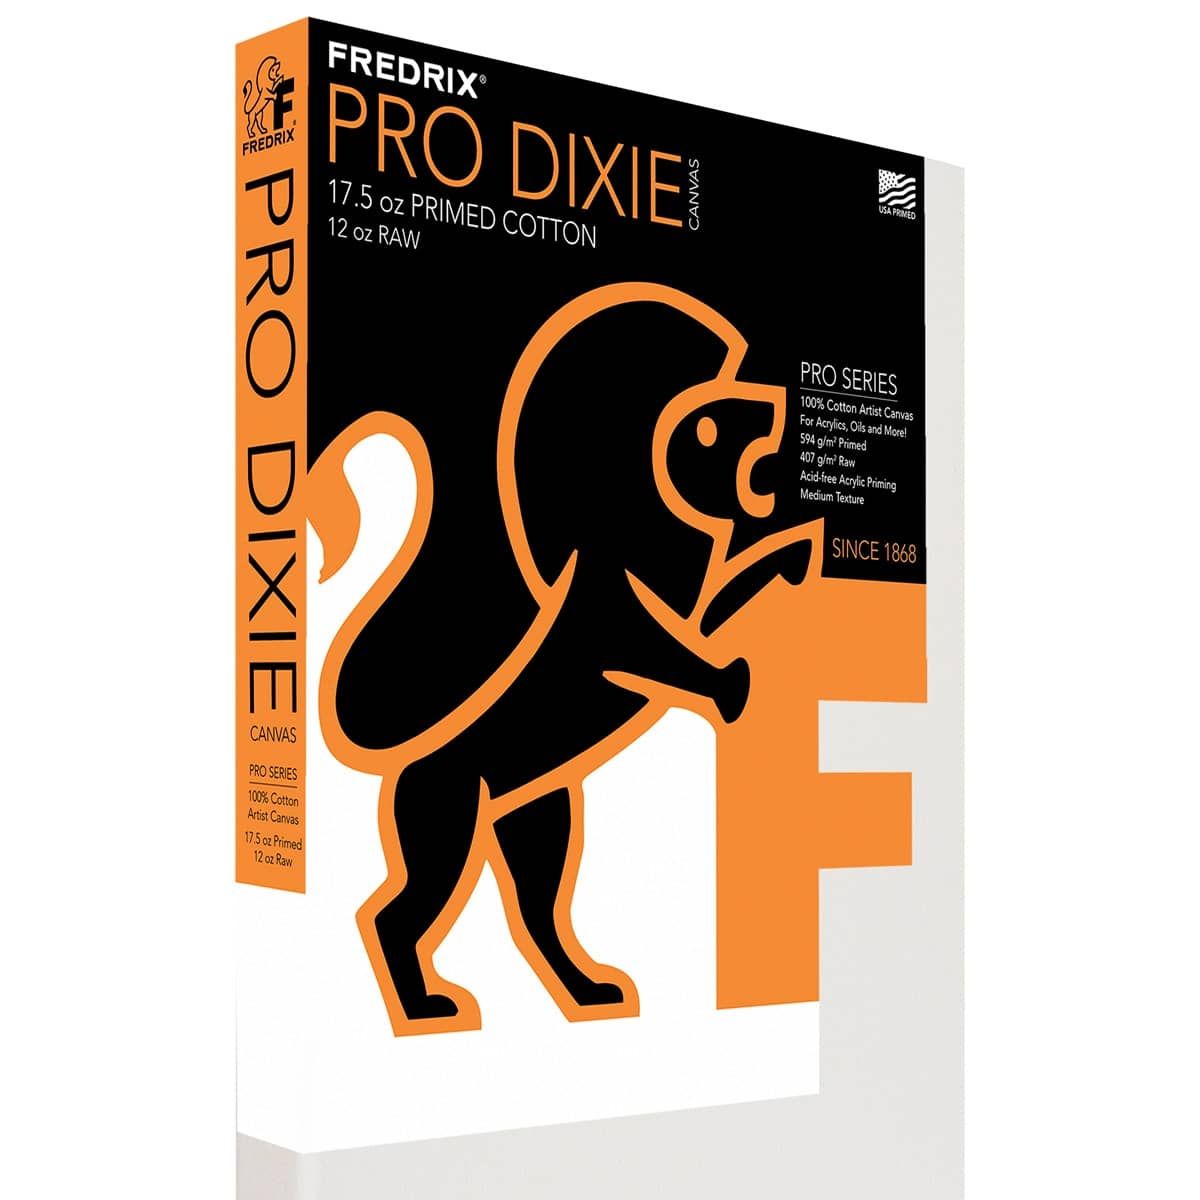 Fredrix Dixie PRO Stretched Canvas 1-3/8 in Deep (Box of 3) 60x72